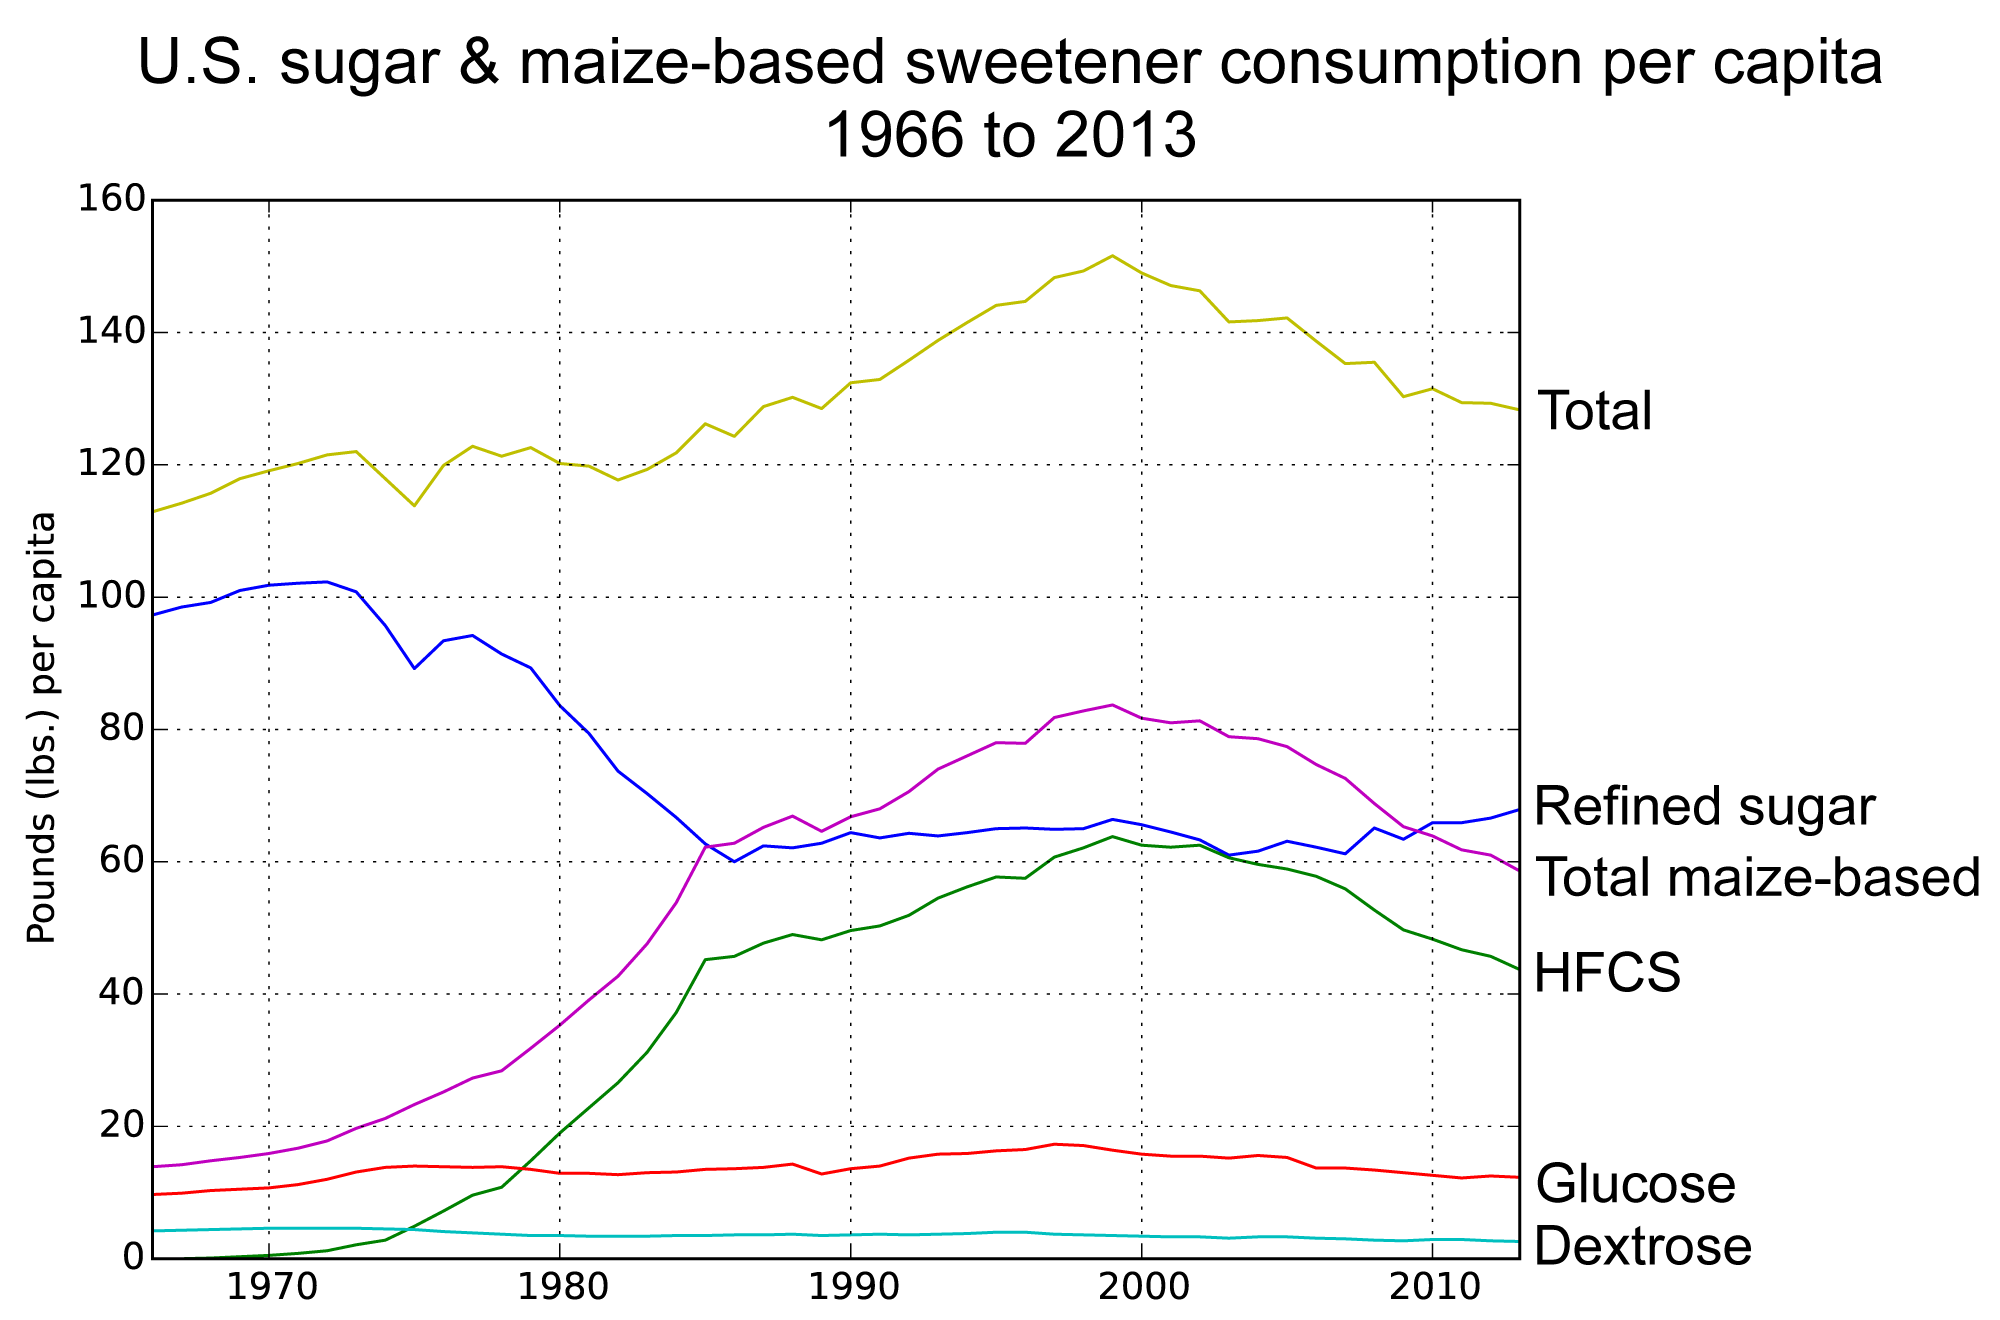 Diagram showing U.S. consumption of sugar and corn sweeteners between 1966 and 2013. The diagram shows that consumption of refined sugar was about 100 pounds per capita in 1966, dropping suddenly to about 60 pounds per capita in the 1980s. Consumption of maize-based sweeteners was low until the mid-1980s, when it suddenly rose to 60 pounds per capita around 1985 and continued to rise until the late 1990s. Overall sweetener consumption peaked in the late 1990s, and dropped to about 130 pounds per capita by 2013.